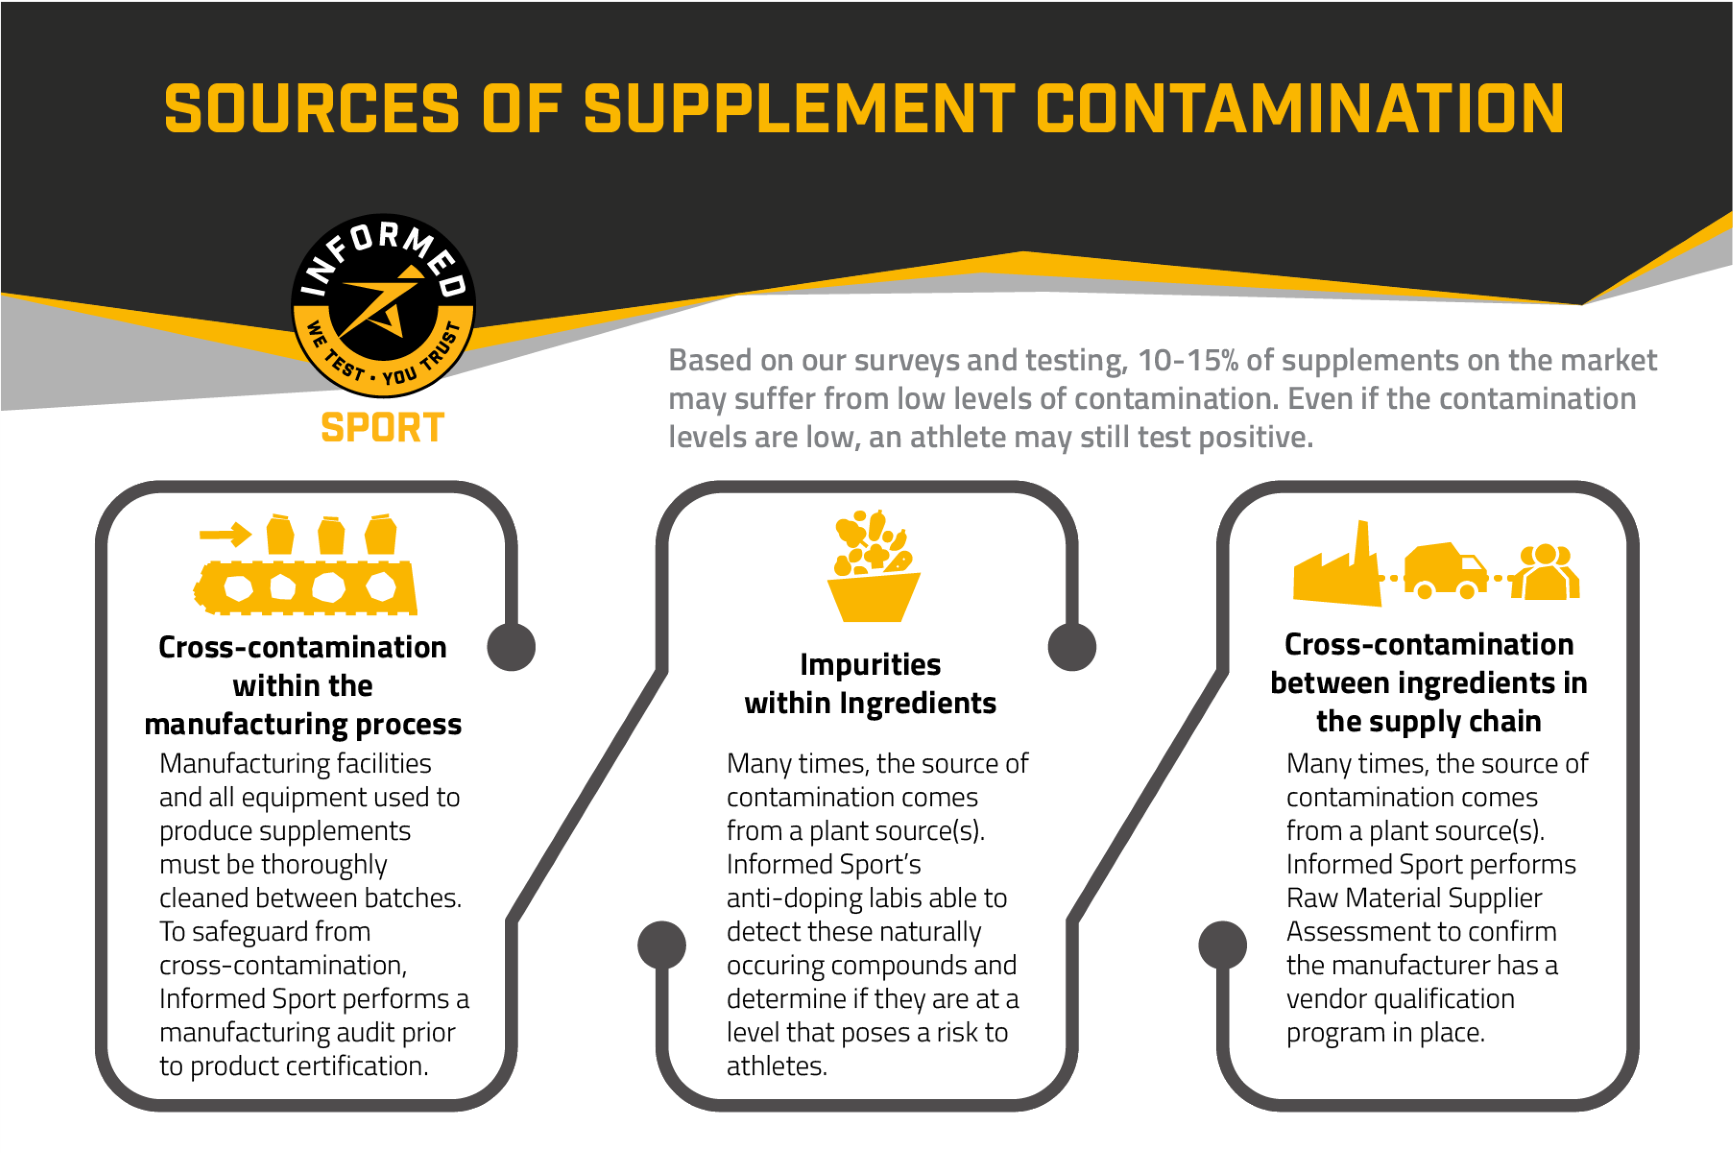 Sources of Supplement Contamination - Informed Sport